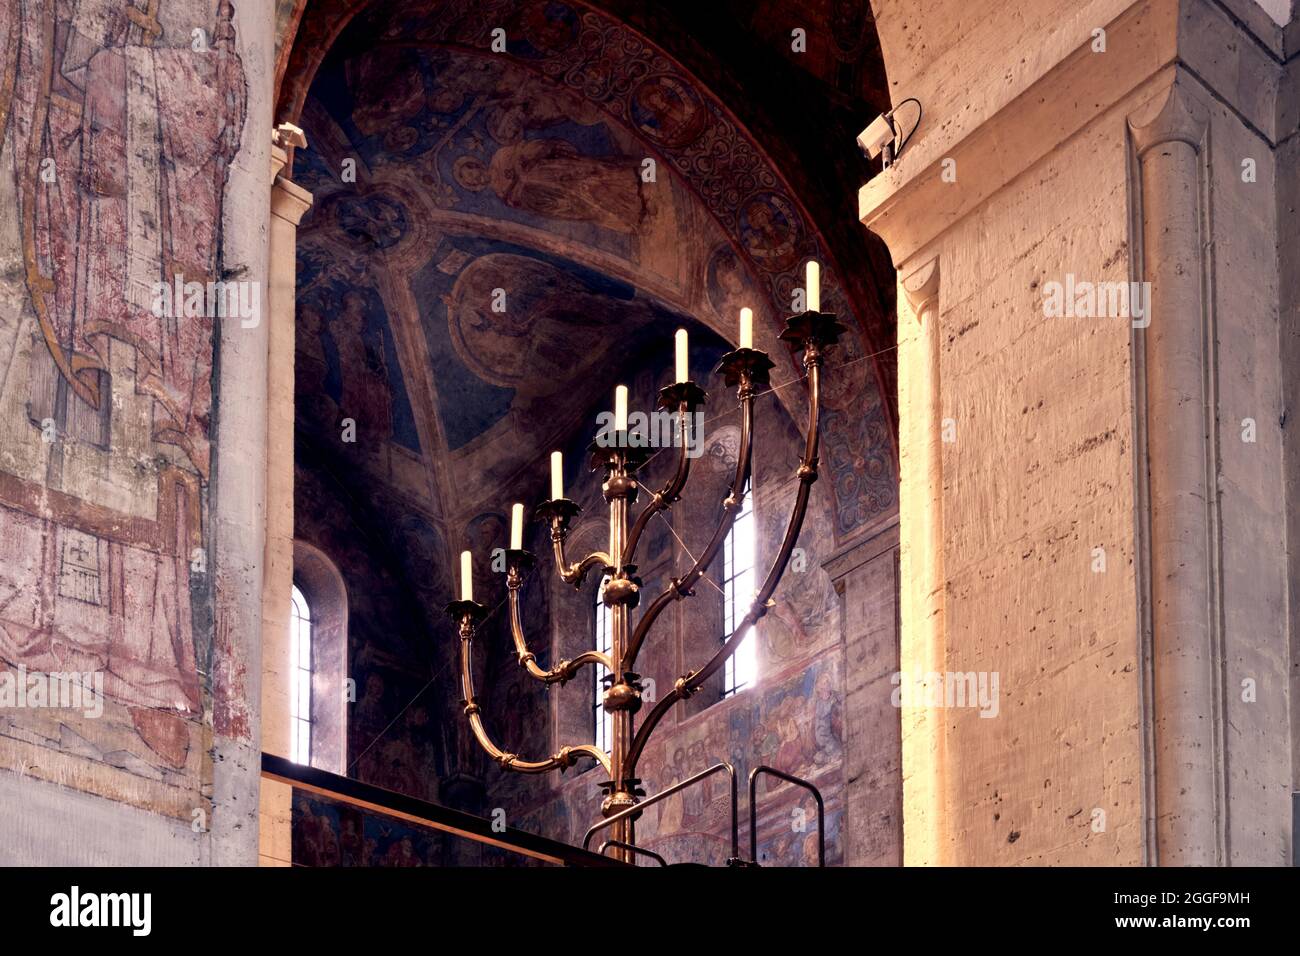 Large seven-branch candlestick in the chancel of a Christian cathedral in Germany Stock Photo